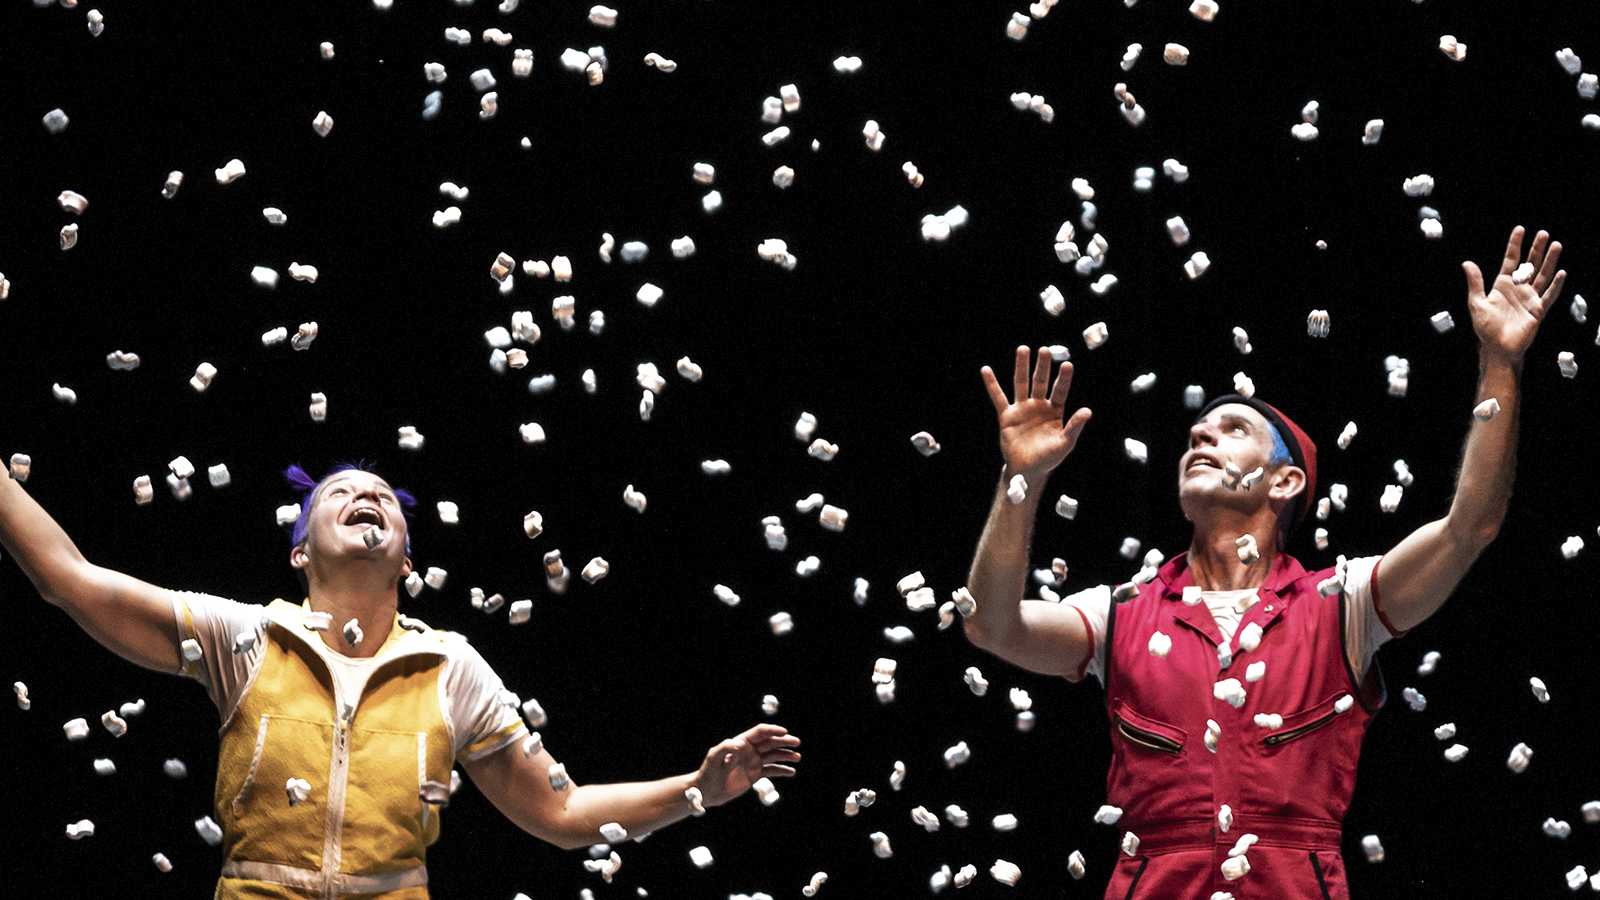 Acrobuffos; two people stand on stage. The person on the left has purple hair and is wearing a yellow zip up jump suit, the person on the right has blue hair and is wearing a matching red jumpsuit. What appears to be packing popcorn is falling from the ceiling. The background is entirely black